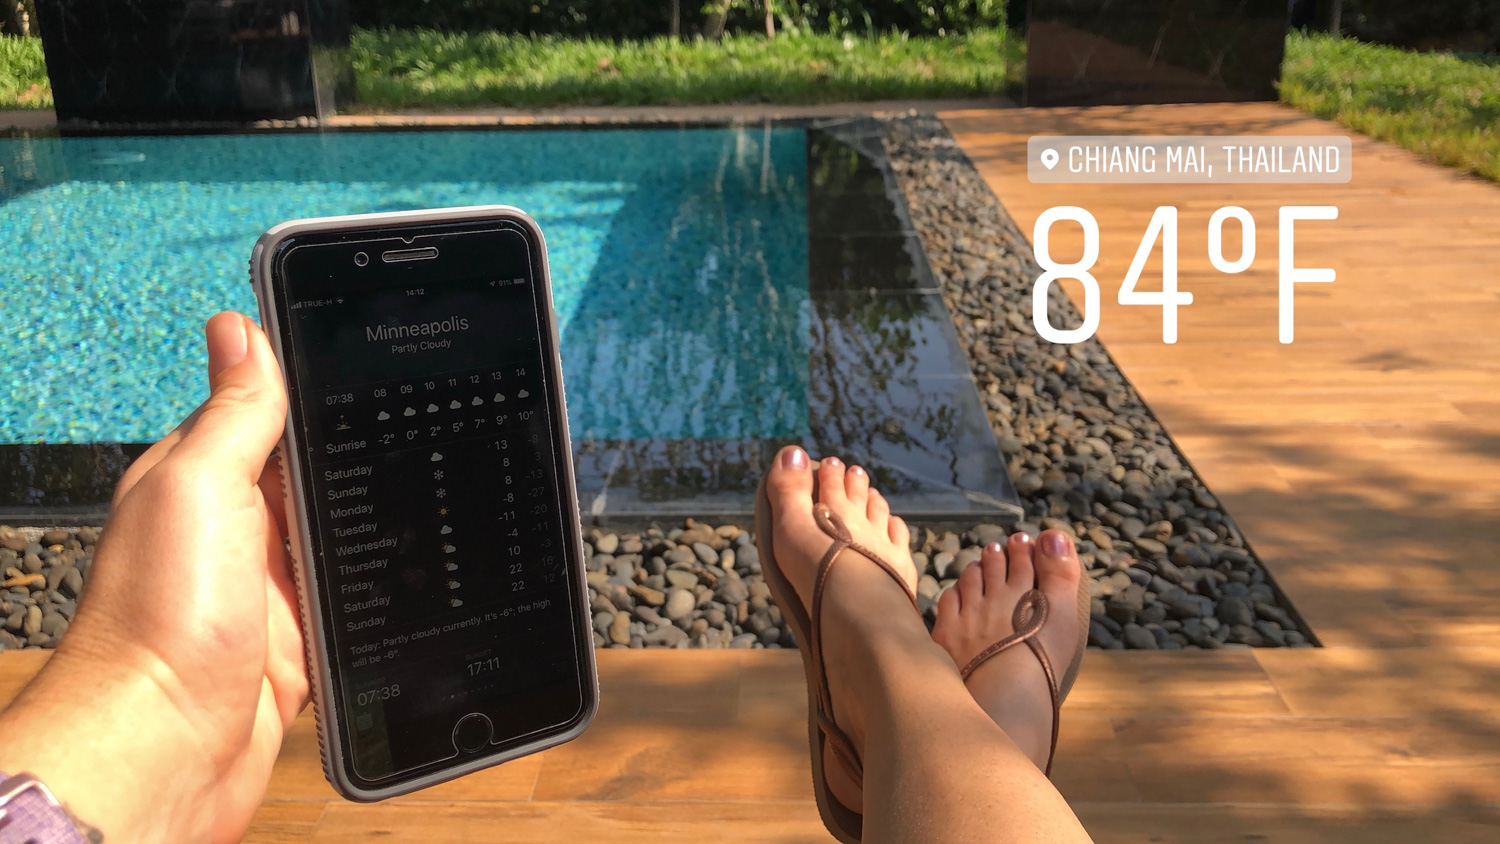 Comparing the weather in Chiang Mai, Thailand to our hometown: Minneapolis, Minnesota. (85F and sunny versus -11F and snowy!)